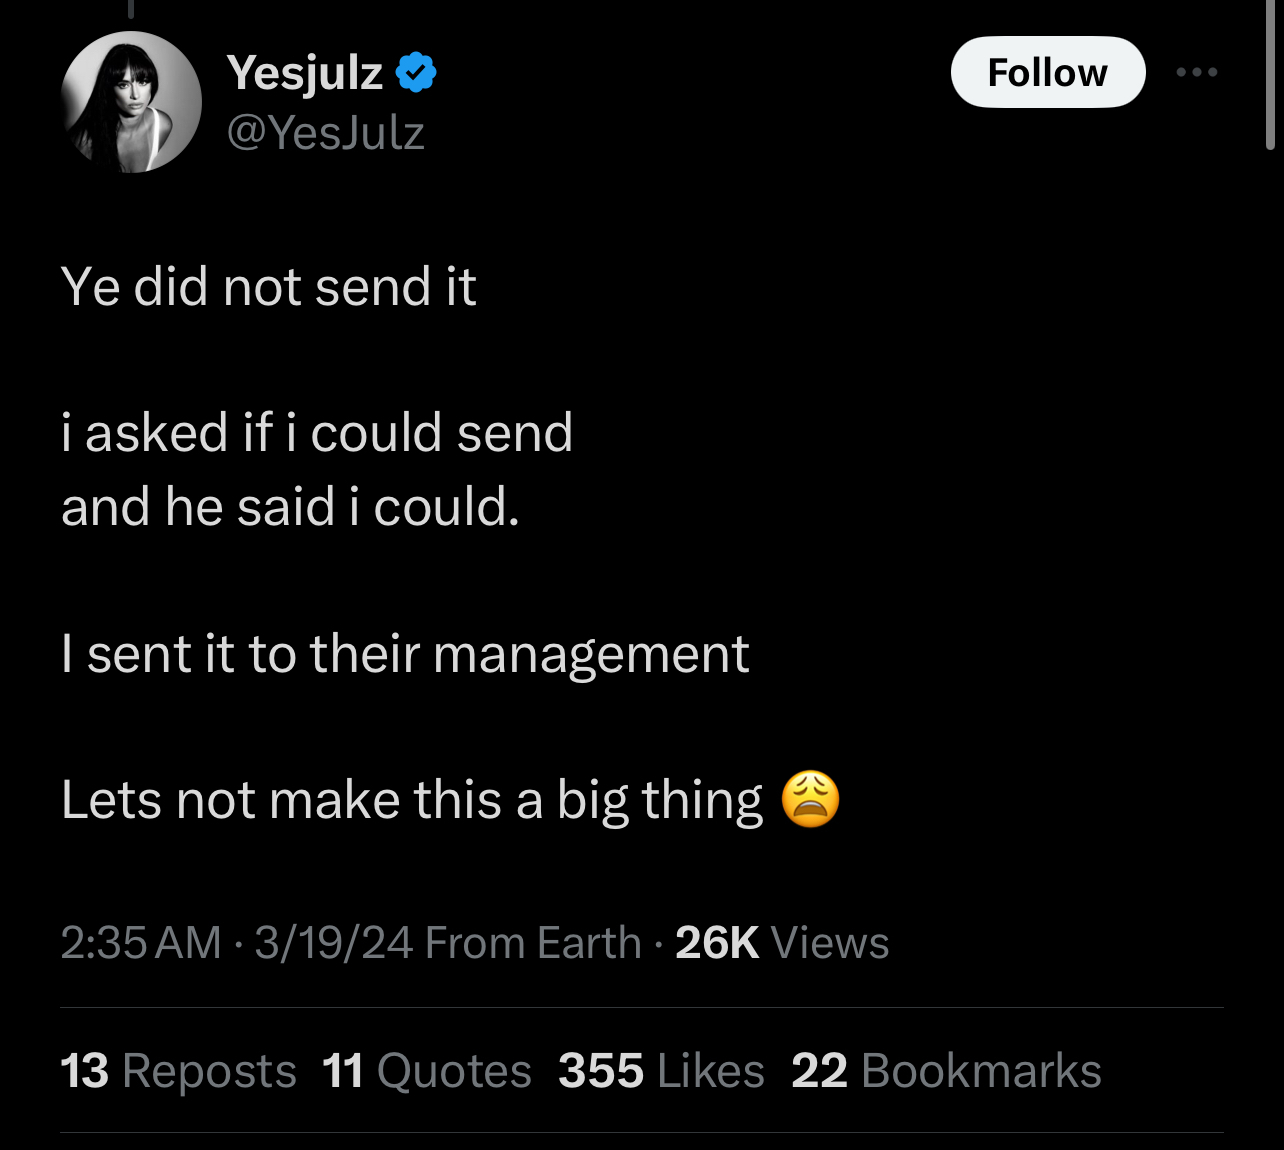 Tweet by @YesJulz discussing sending something to an unspecified recipient with consent, and contacting their management, implying a plea to not escalate the issue